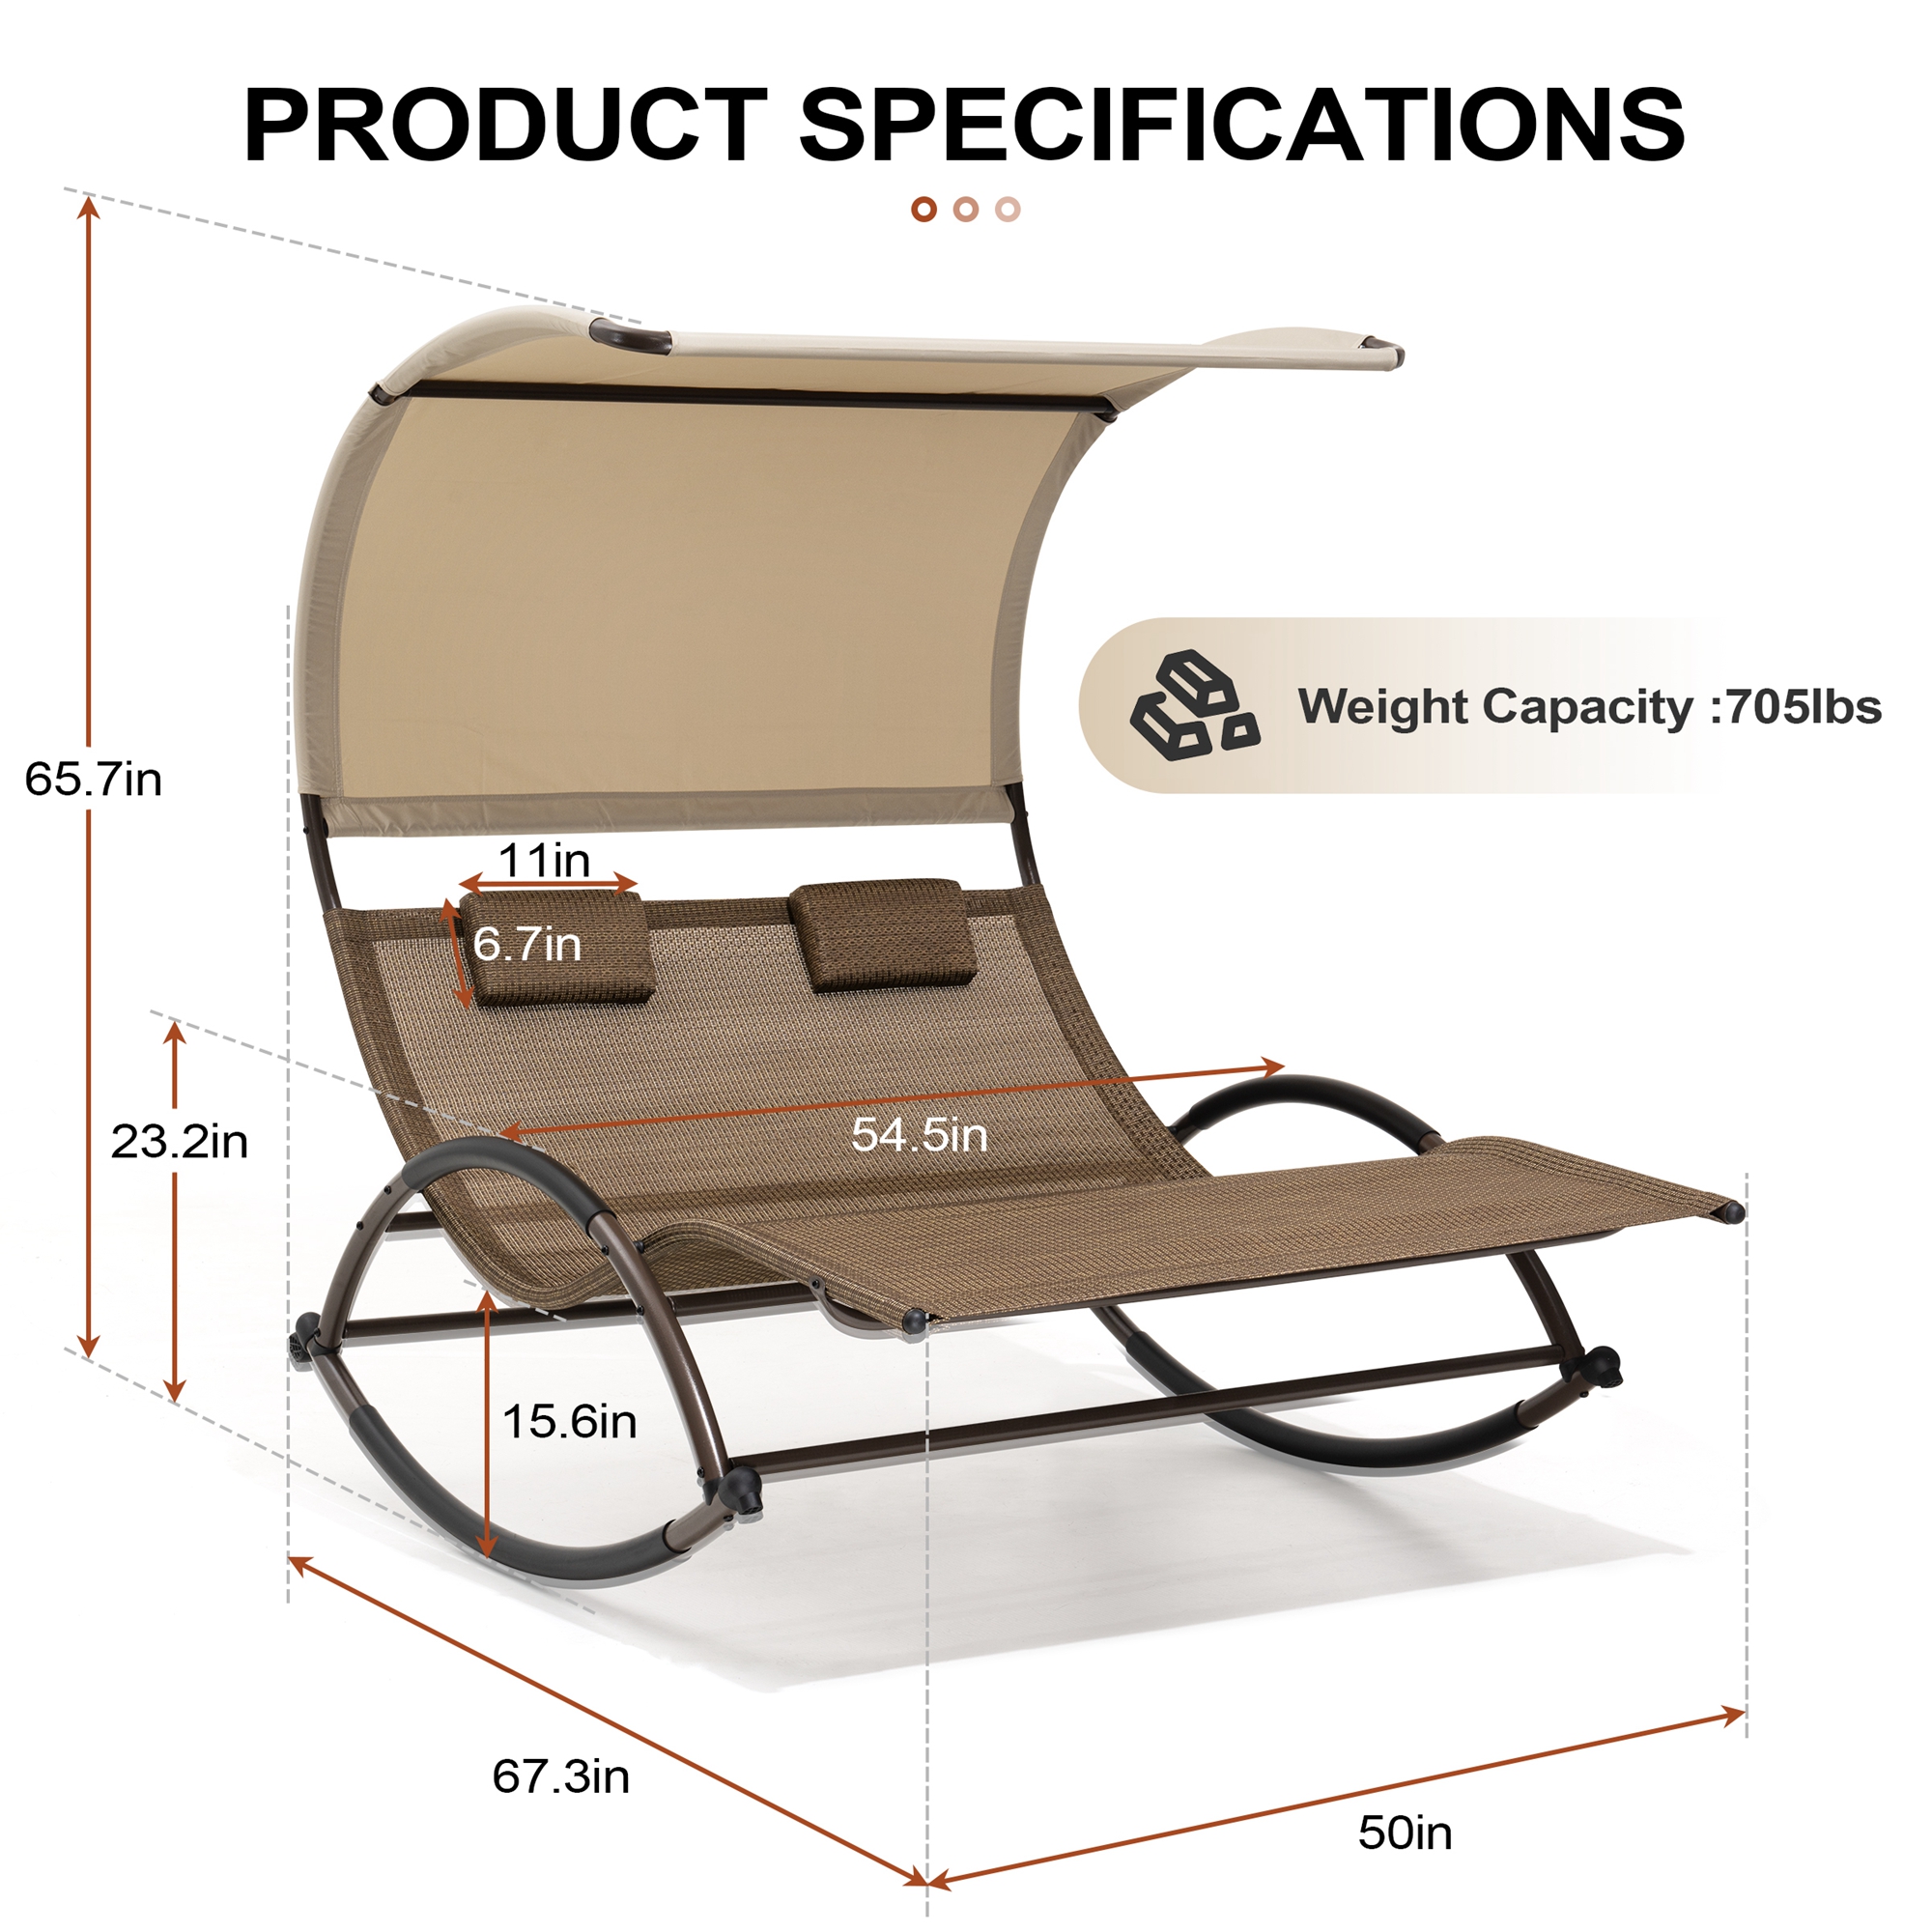 Pellebant Outdoor Double Chaise Lounge with Shade Patio Metal Rocking Chair in Brown - image 3 of 7